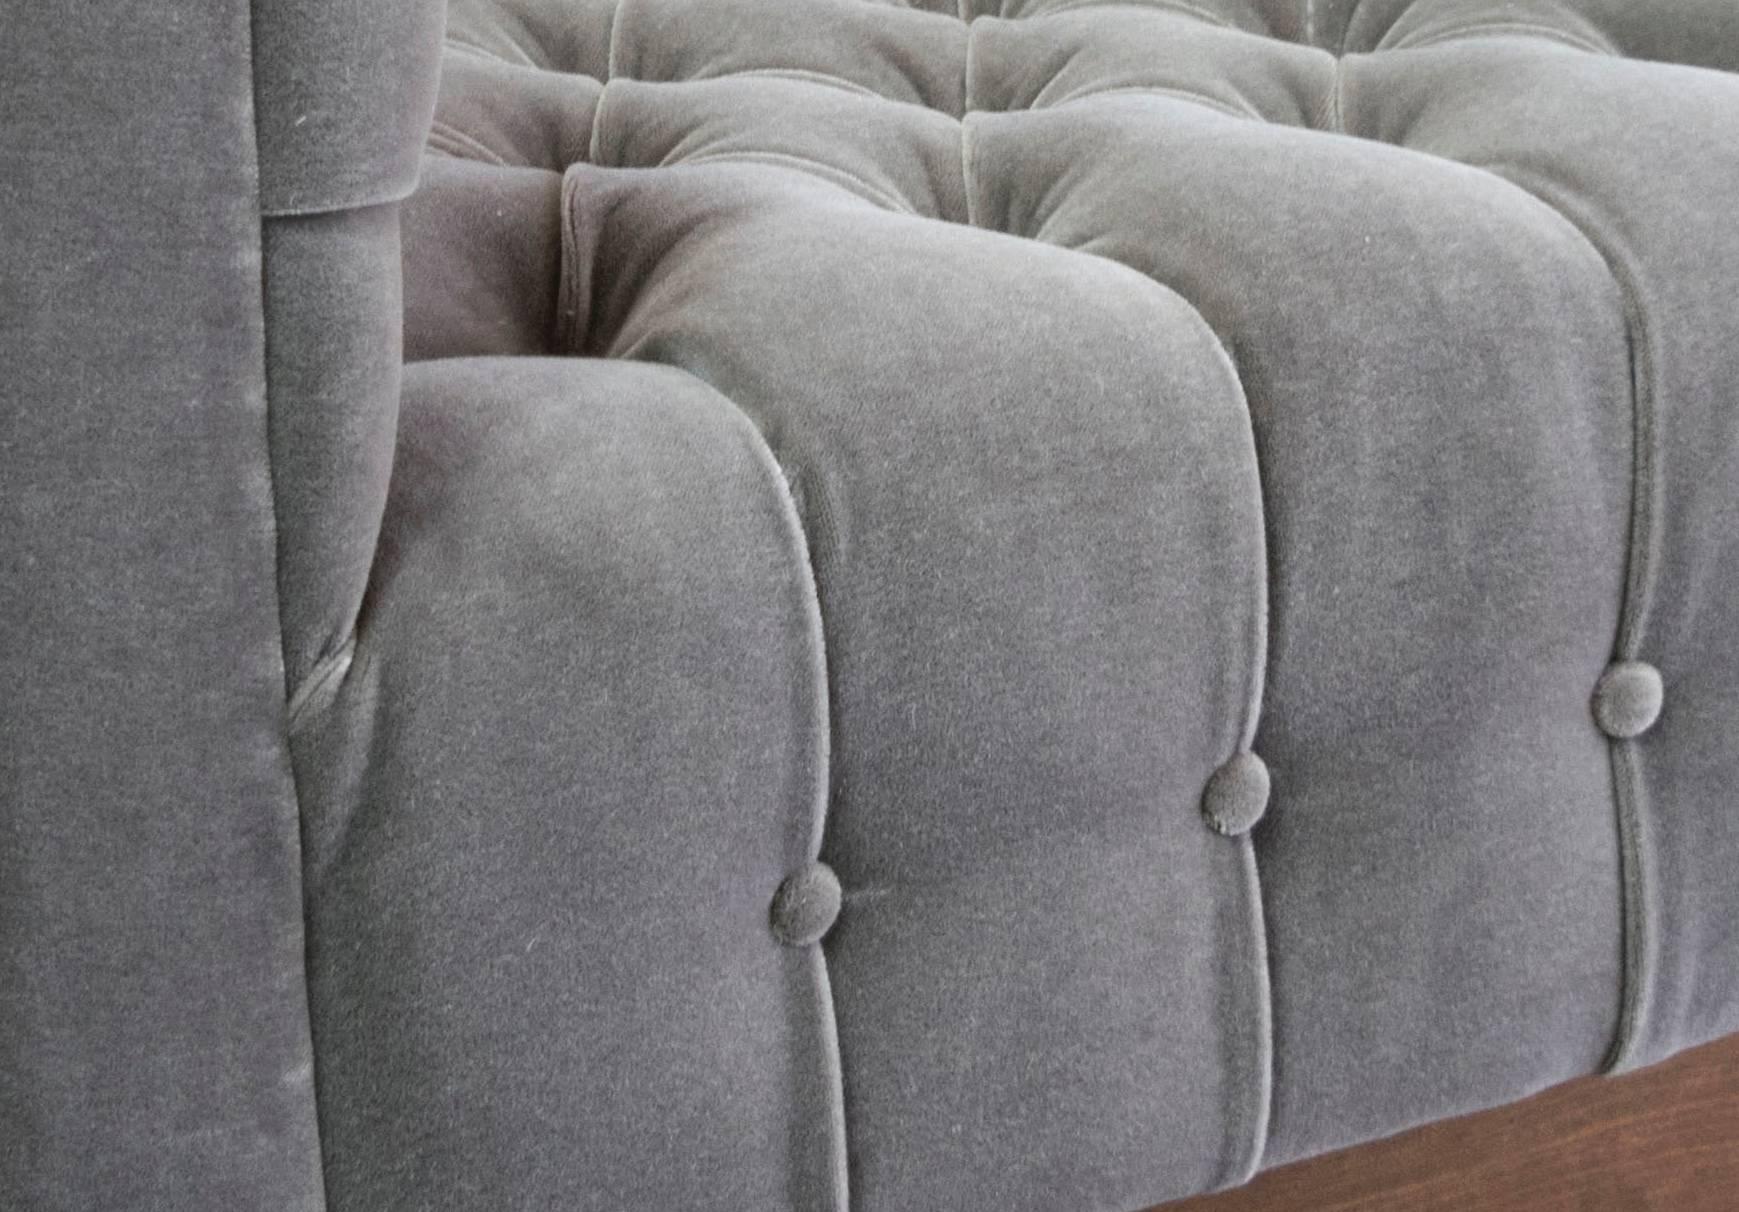 Oversized Milo Baughman Tufted Lounge Chairs in Smoky Gray Mohair In Excellent Condition For Sale In Houston, TX